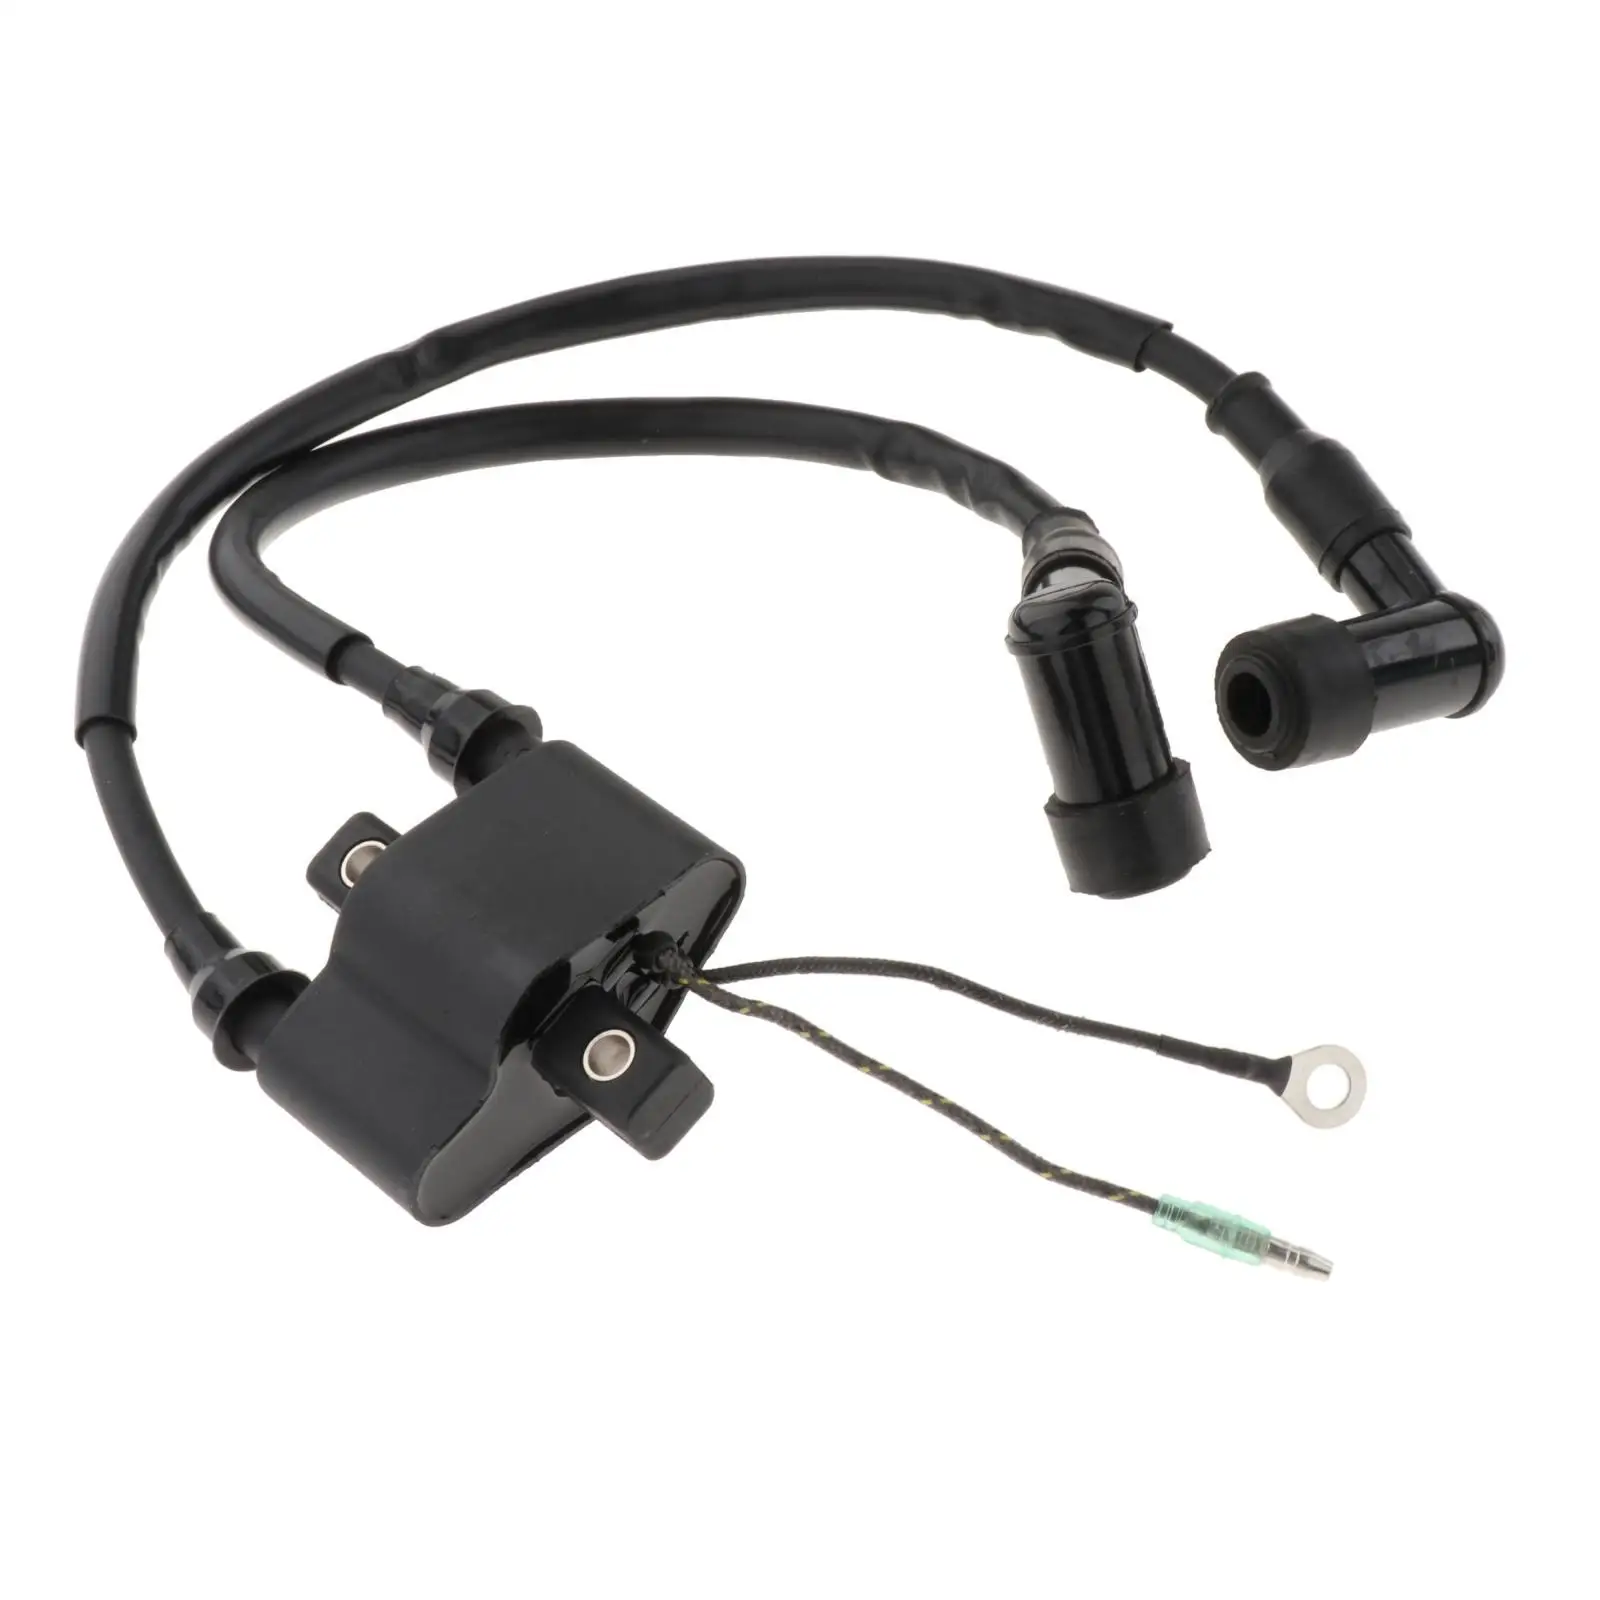 Ignition Coil Parts 3G2-06040-4 803706A1 3G2-06040 3G2060404 Fit for Tohatsu 9.9 15 18HP 2 Stroke Boat Motor Outboard